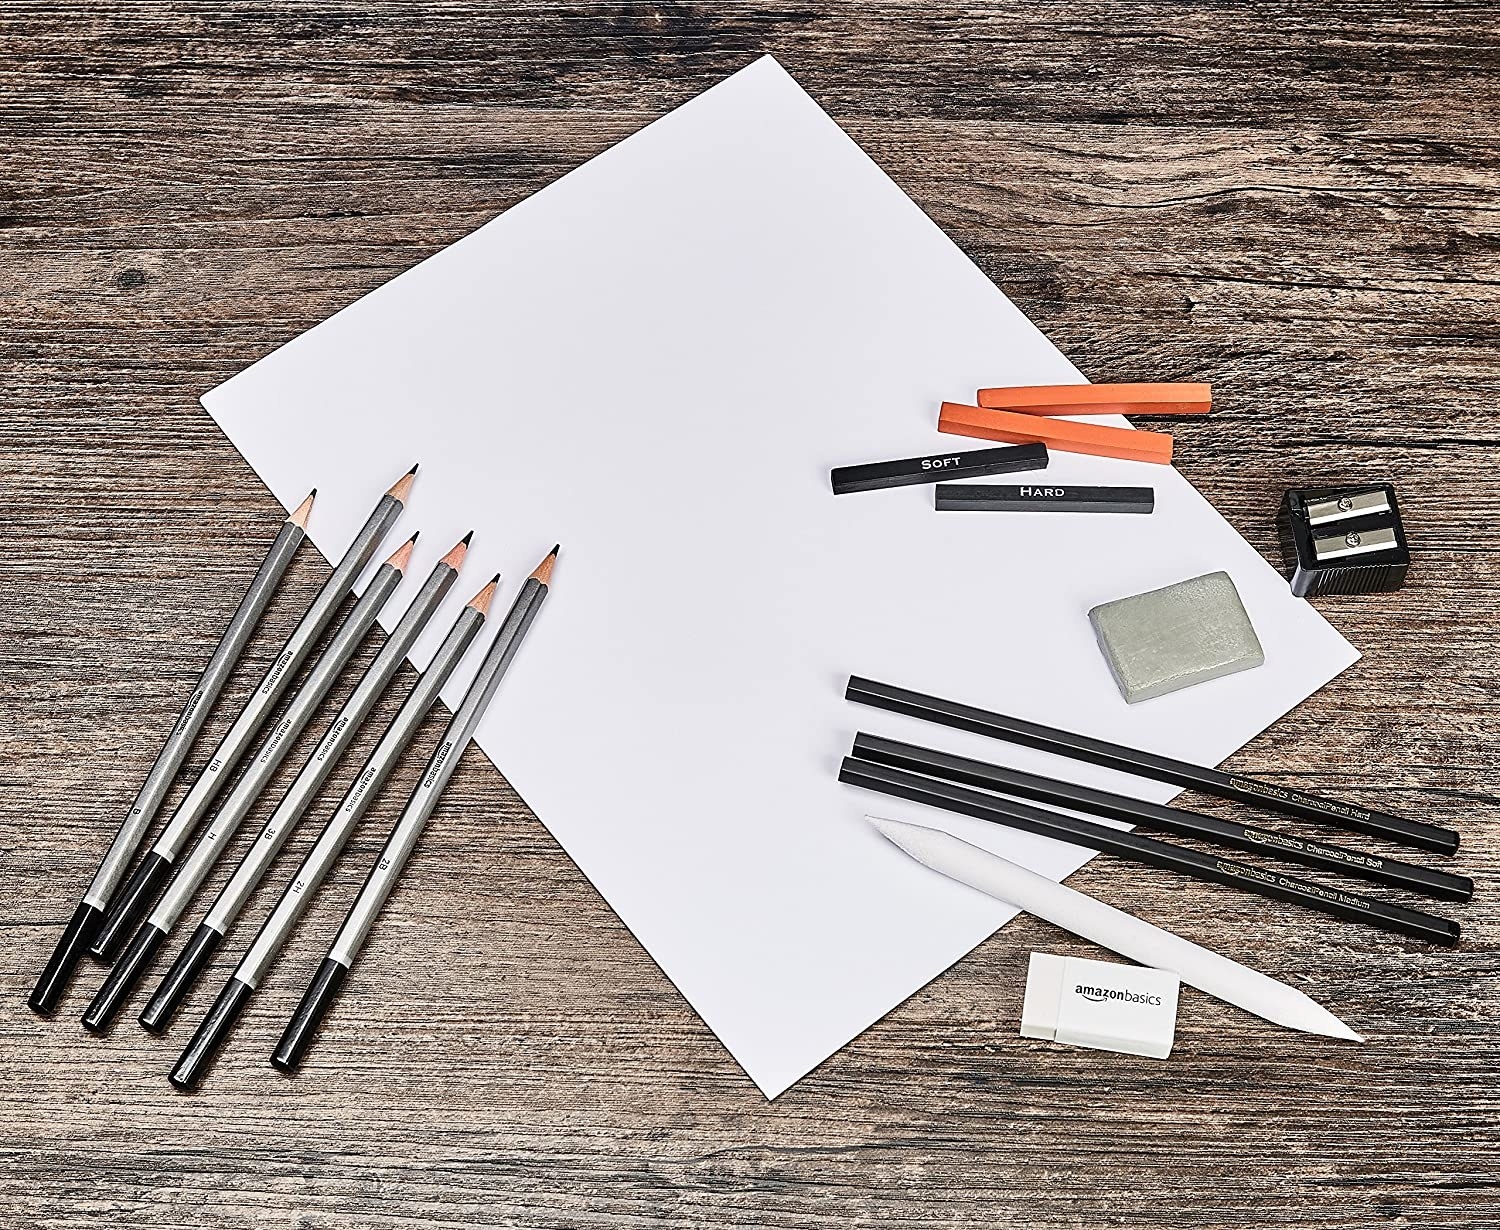 All the sketching tools on a piece of paper